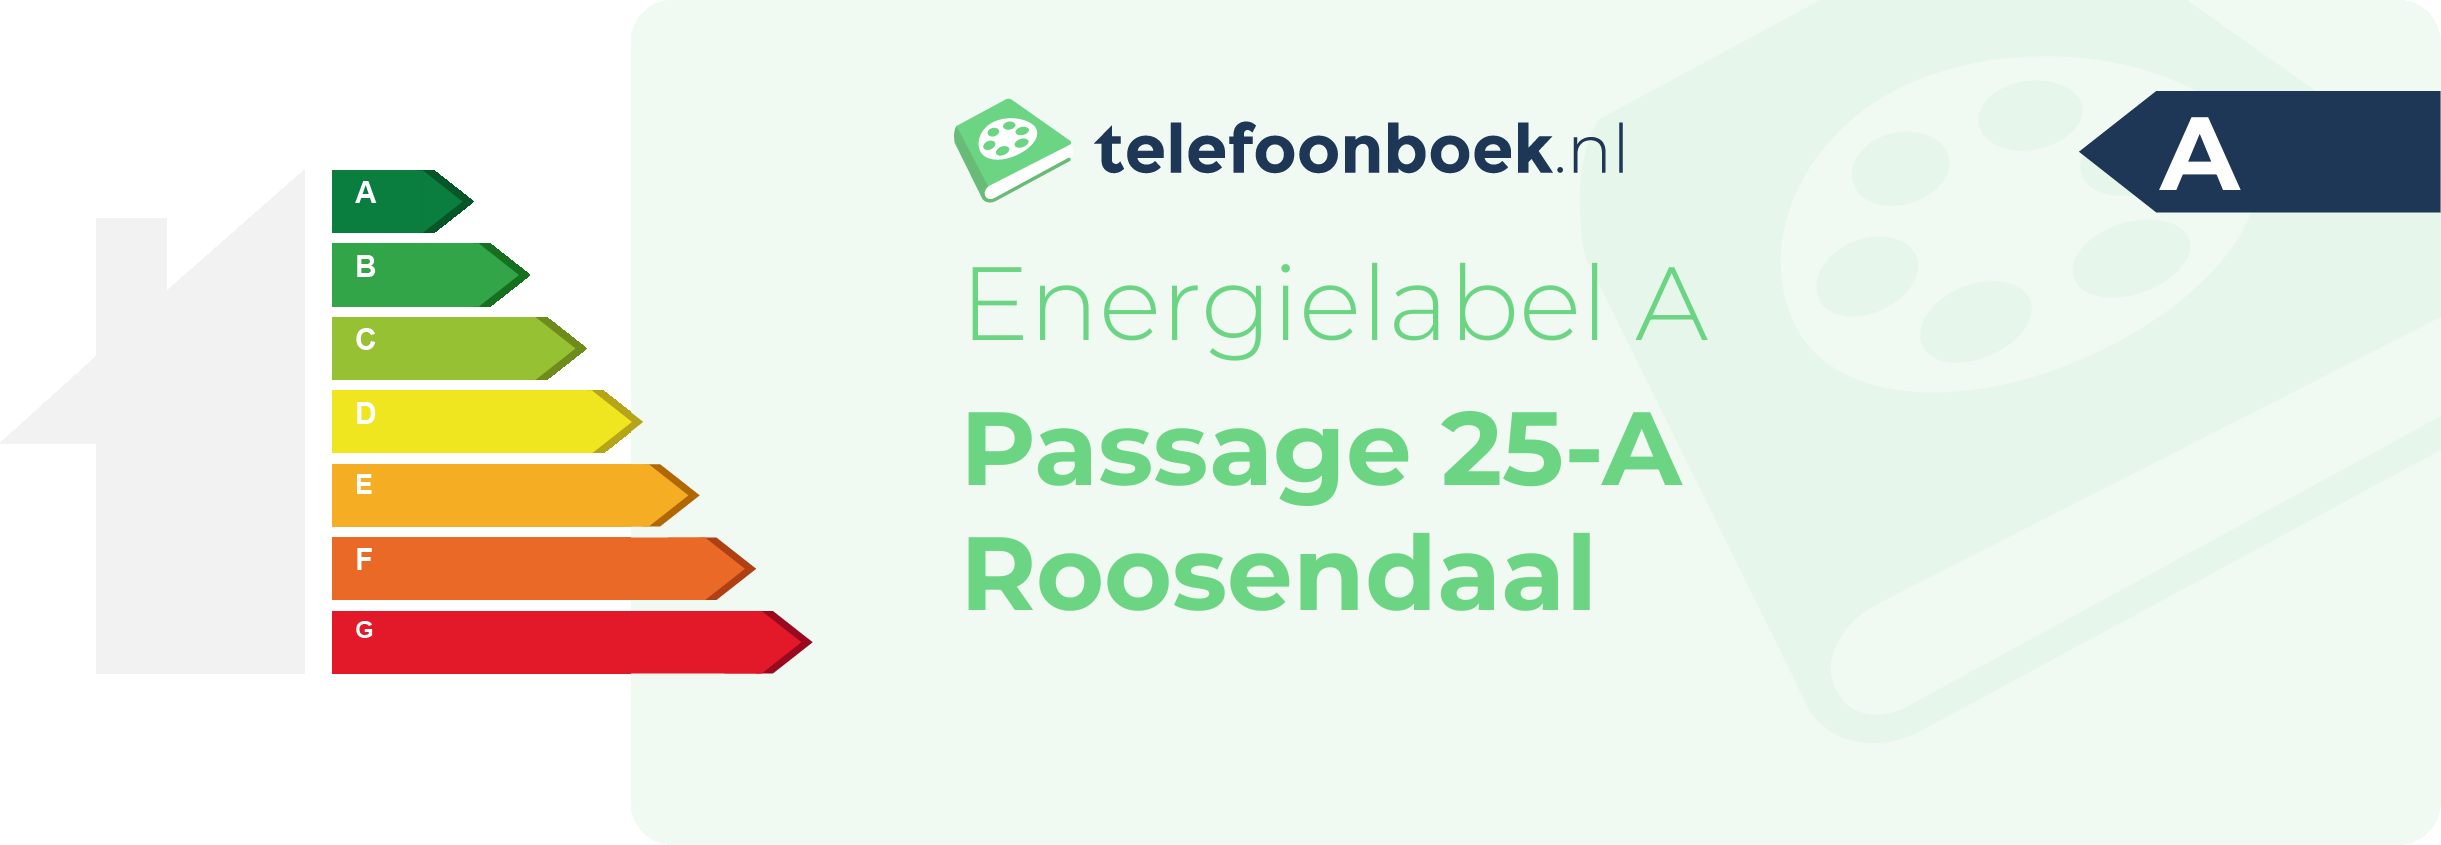 Energielabel Passage 25-A Roosendaal